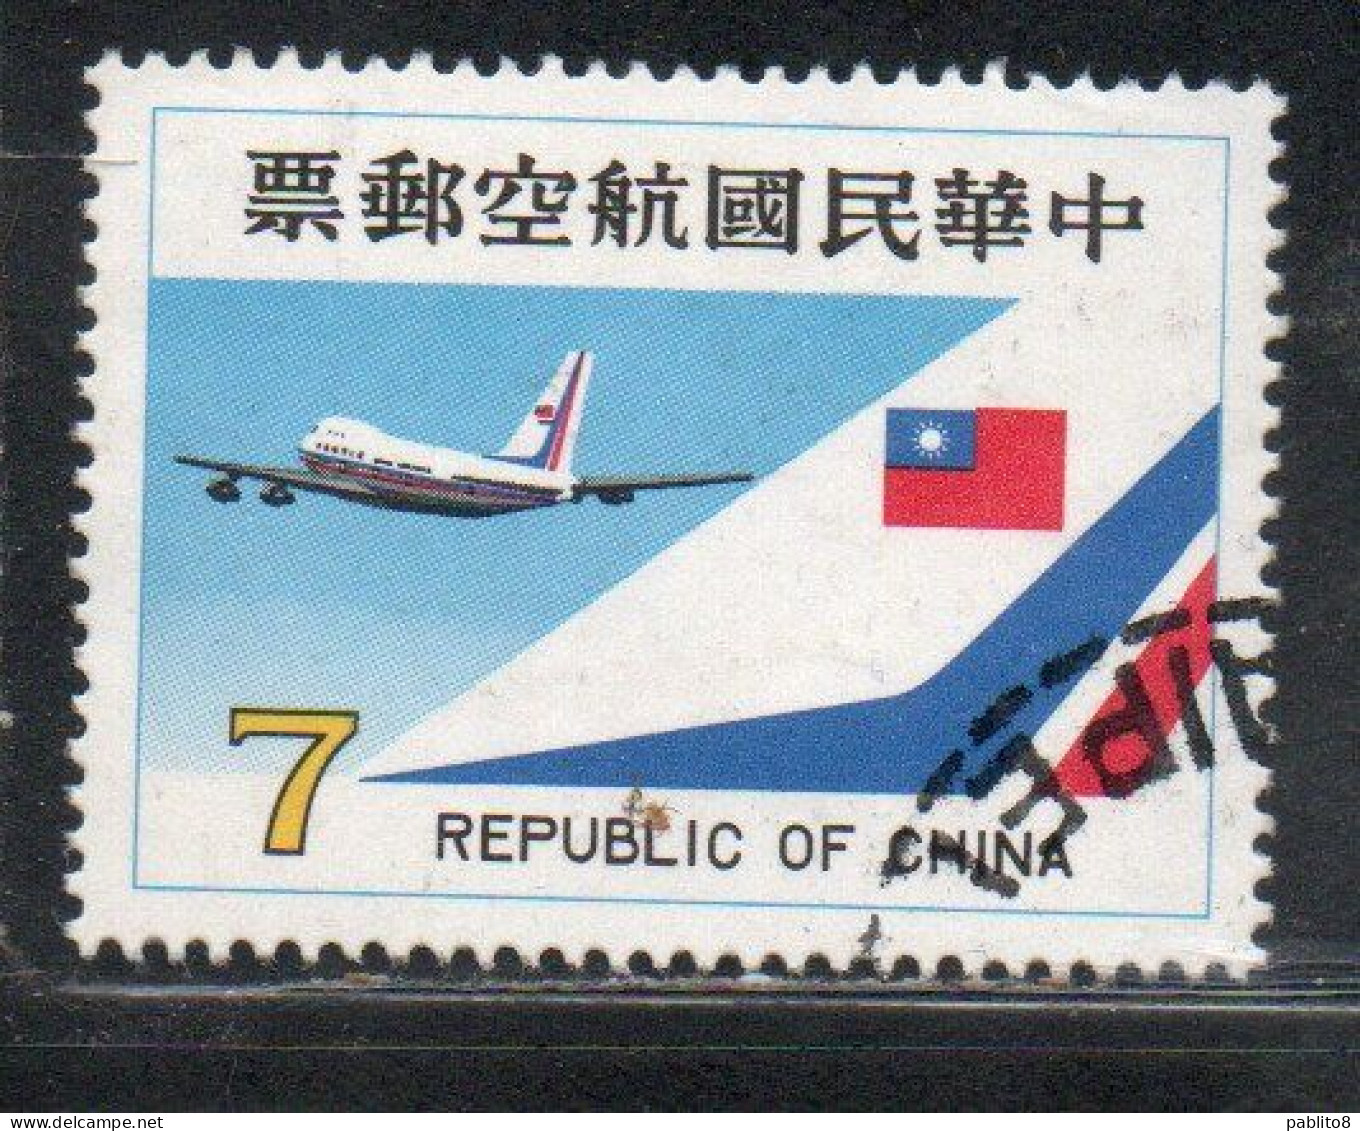 CHINA REPUBLIC CINA TAIWAN FORMOSA 1980 AIR POST MAIL AIRMAIL CHINA AIRLINES JET 7$ USED USATO OBLITERE' - Posta Aerea